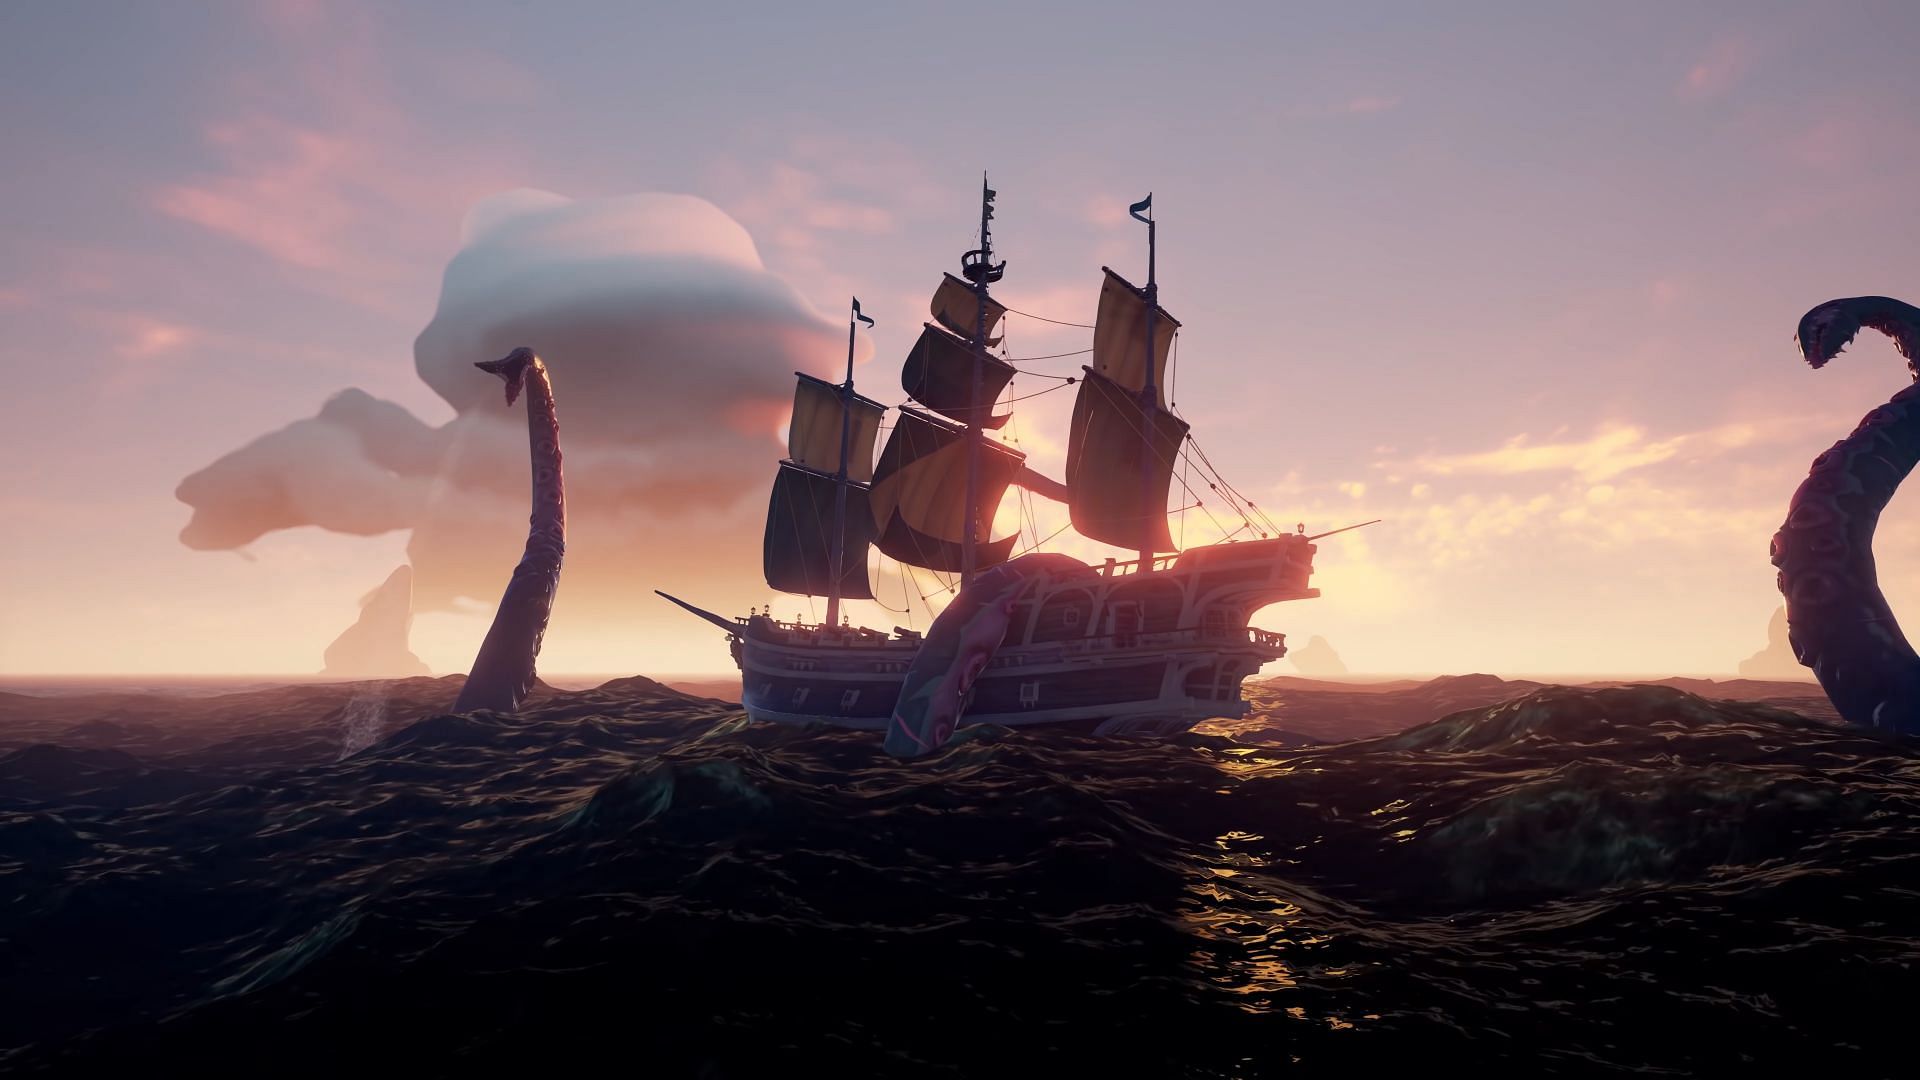 Attacked by the Kraken (Image via Sea of Thieves)